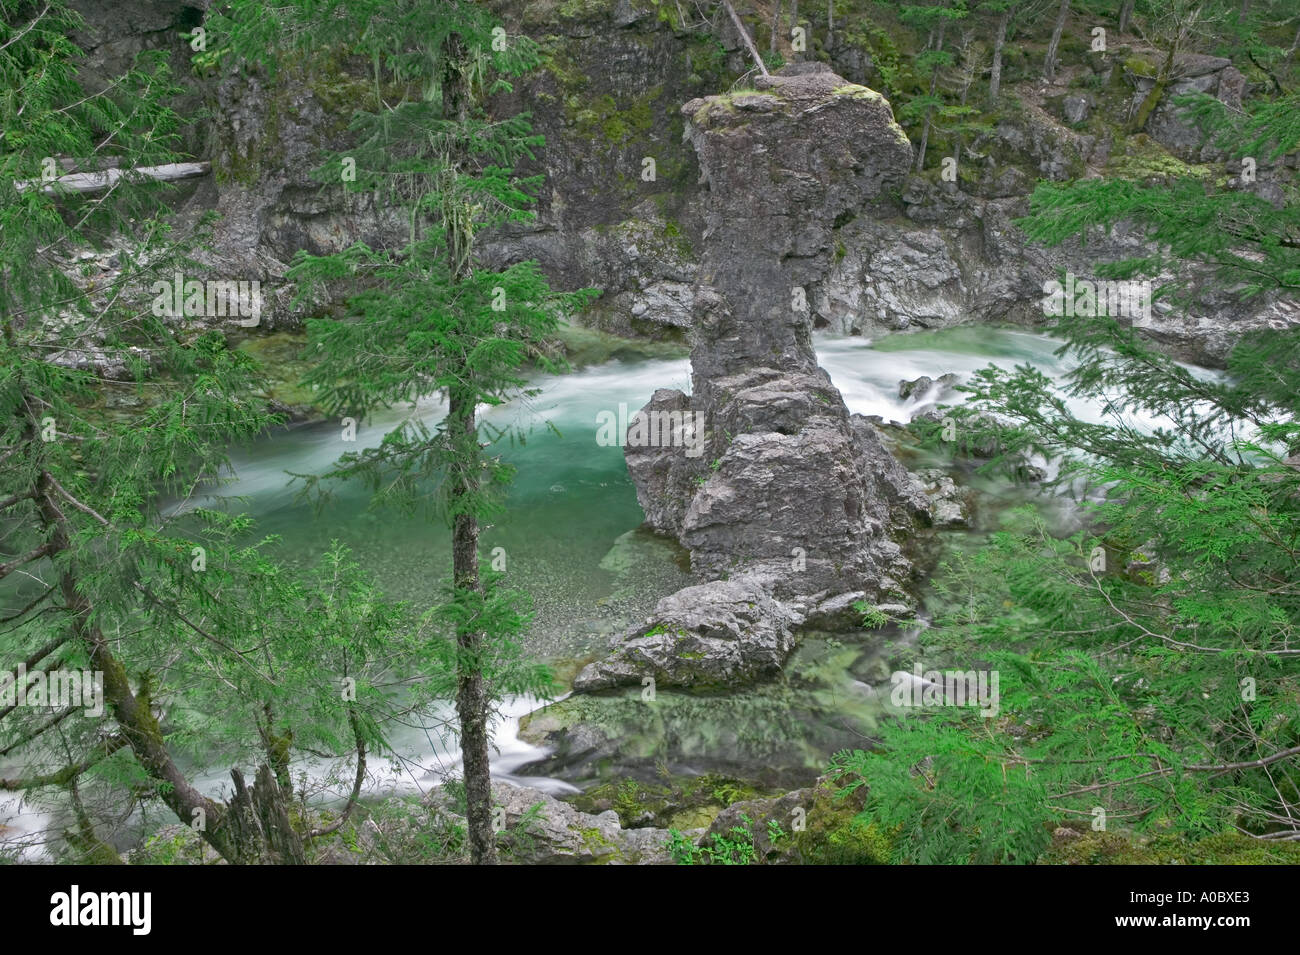 Little North Santiam Wild and Scenic River with large molar rock Willamette National Forest Oregon Stock Photo